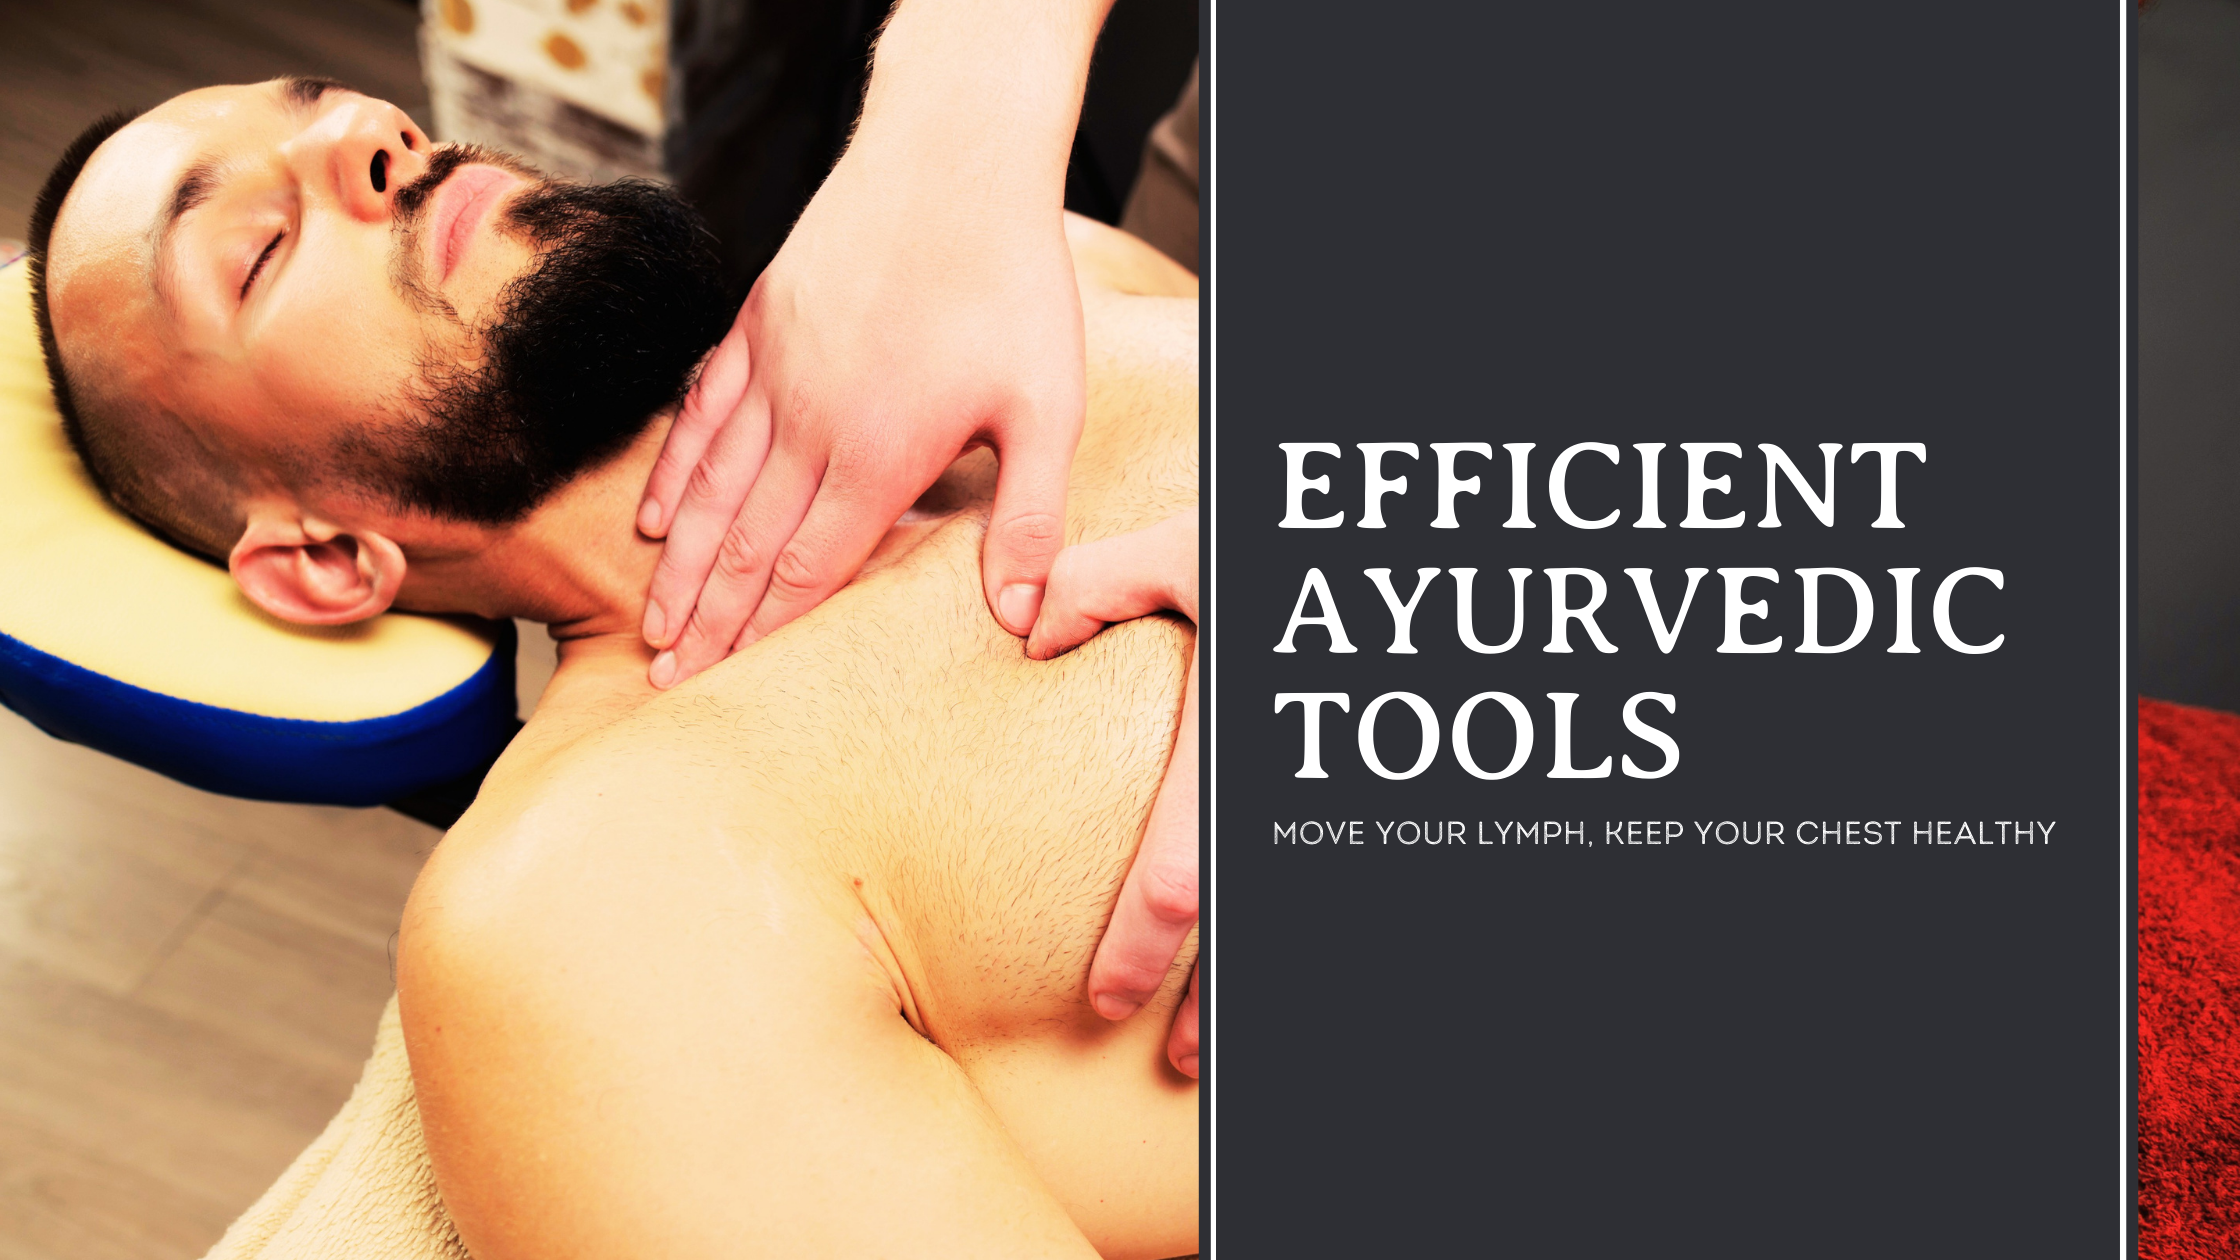 Efficient Ayurvedic Tools for Chest Health